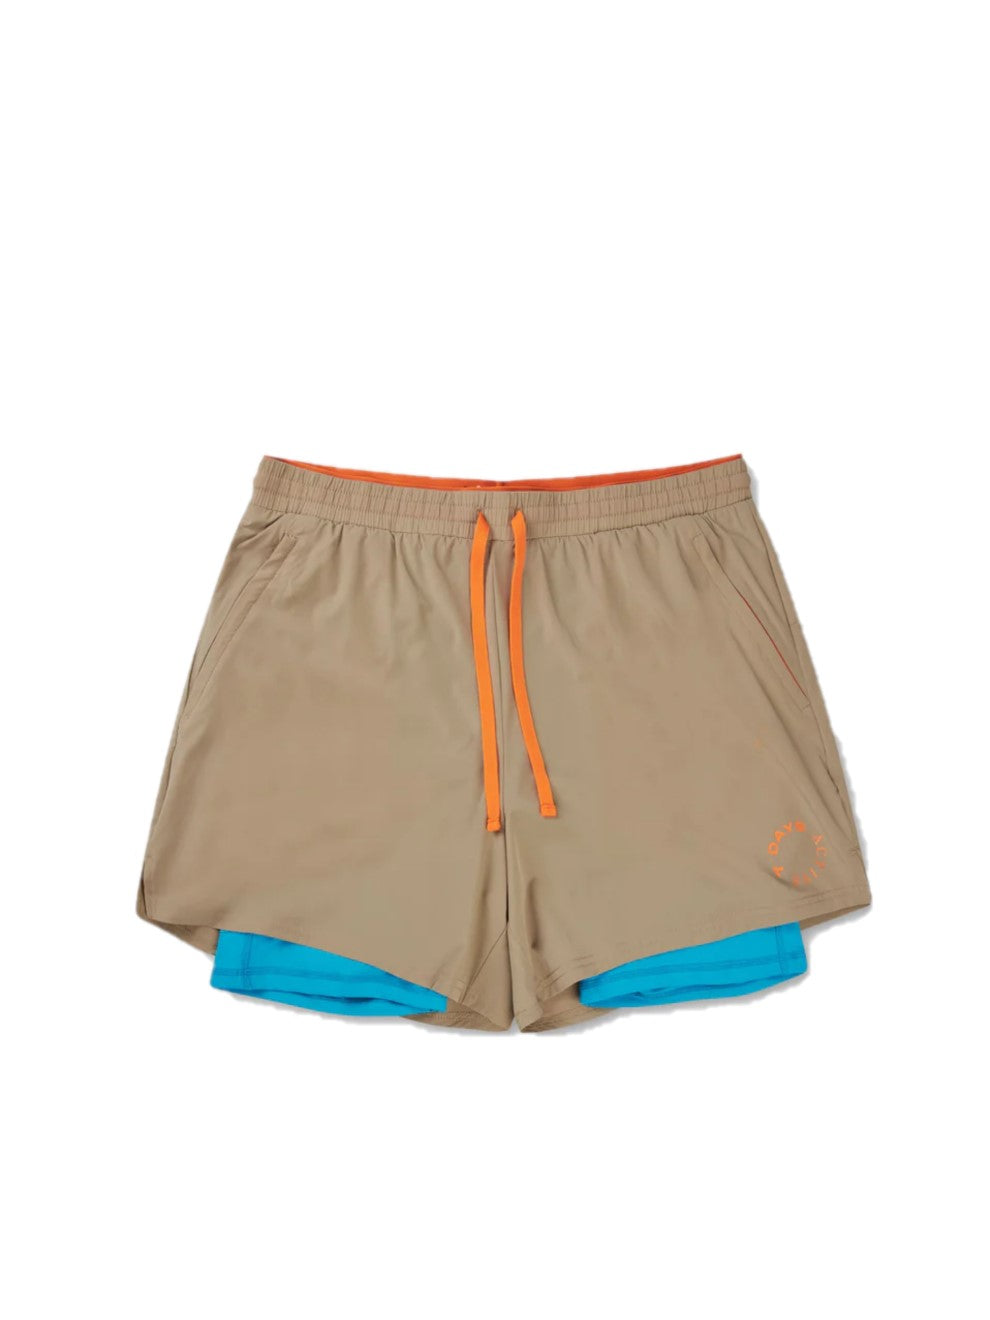 Two-In-One Shorts